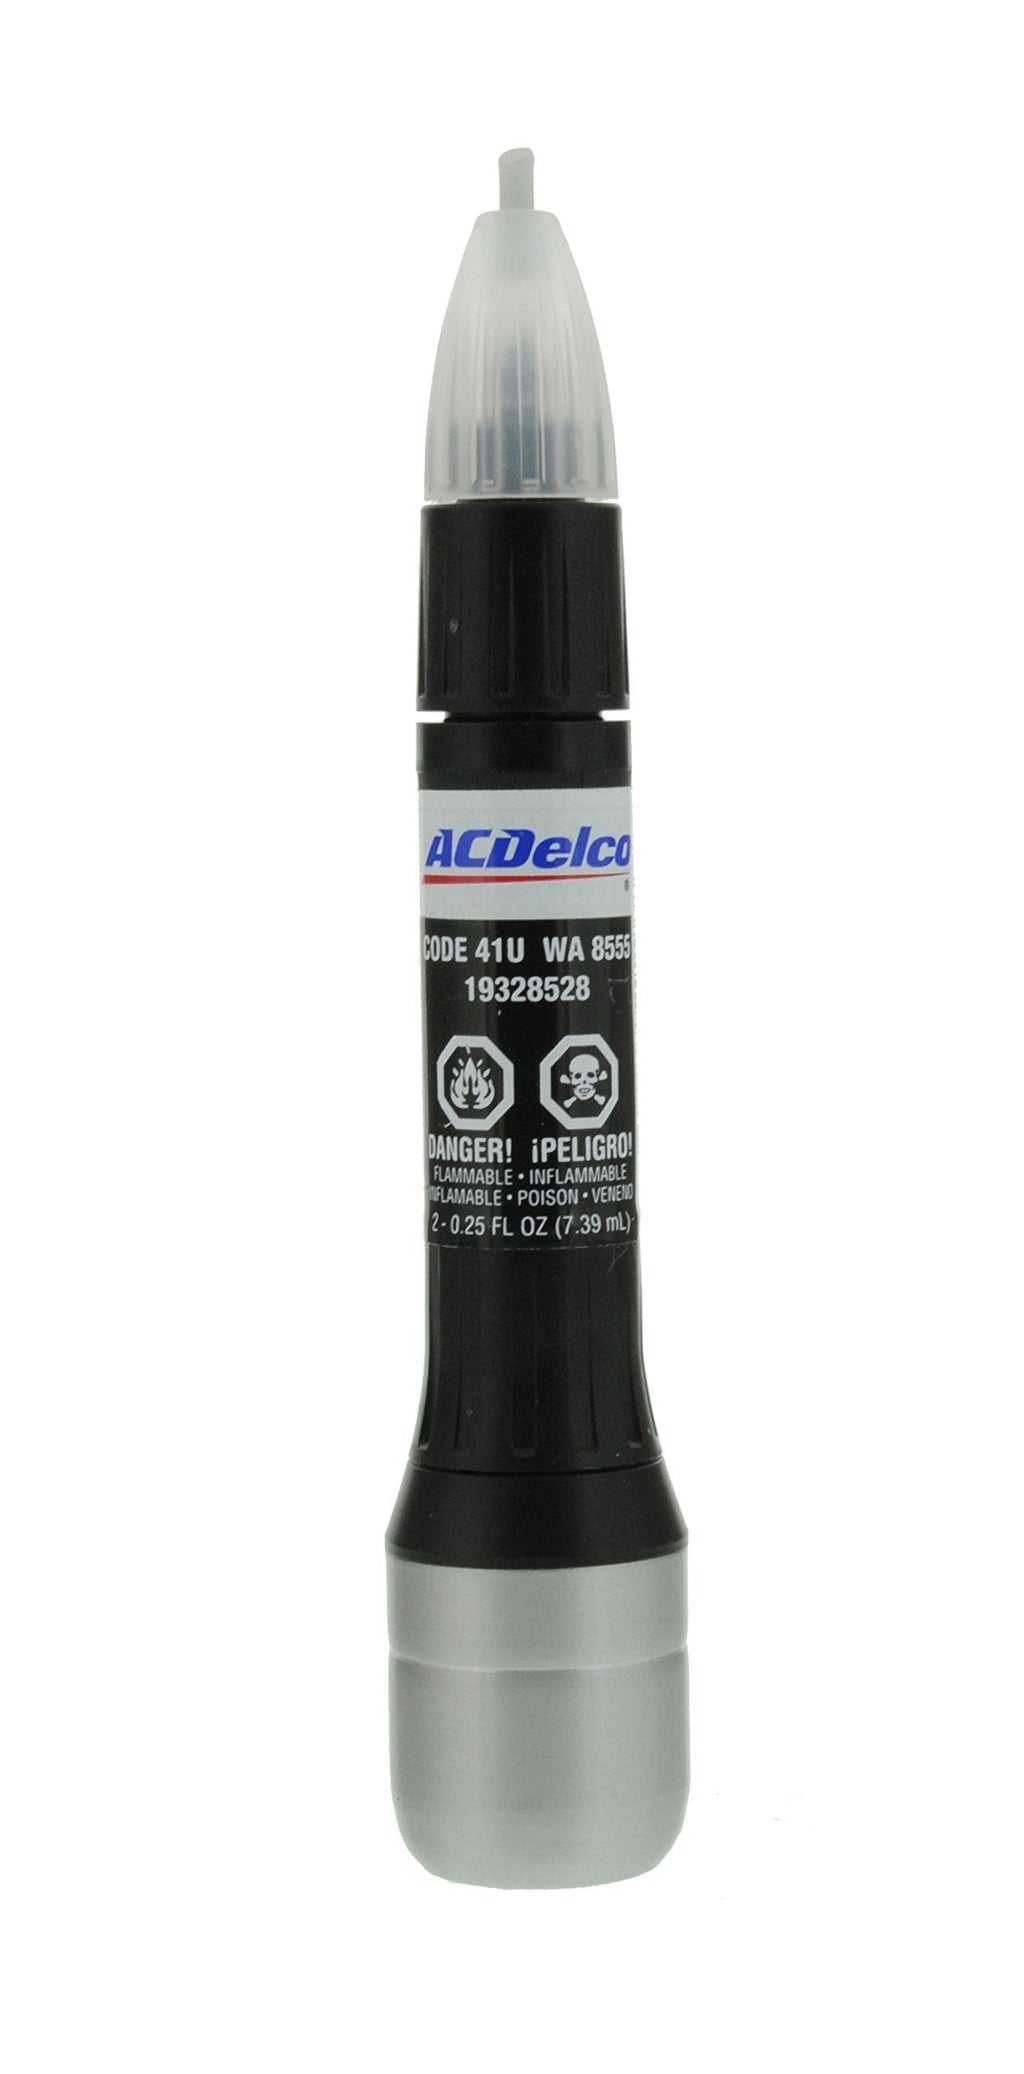  [AUSTRALIA] - ACDelco 19367651 Black (WA8555) Four-In-One Touch-Up Paint - .5 oz Pen, Model:19367651